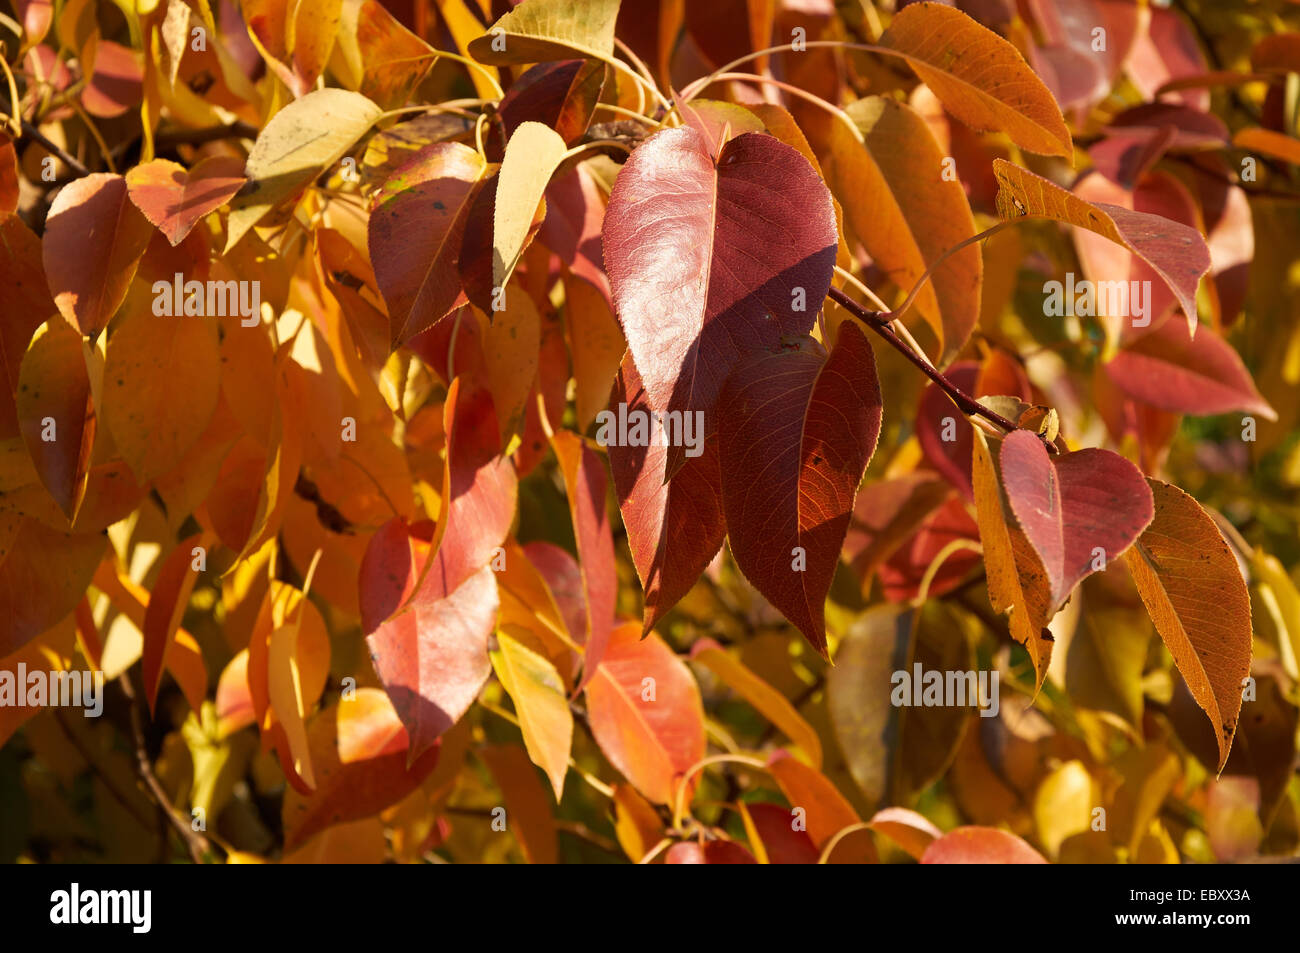 Bright red and yellow leaves of pear tree Stock Photo